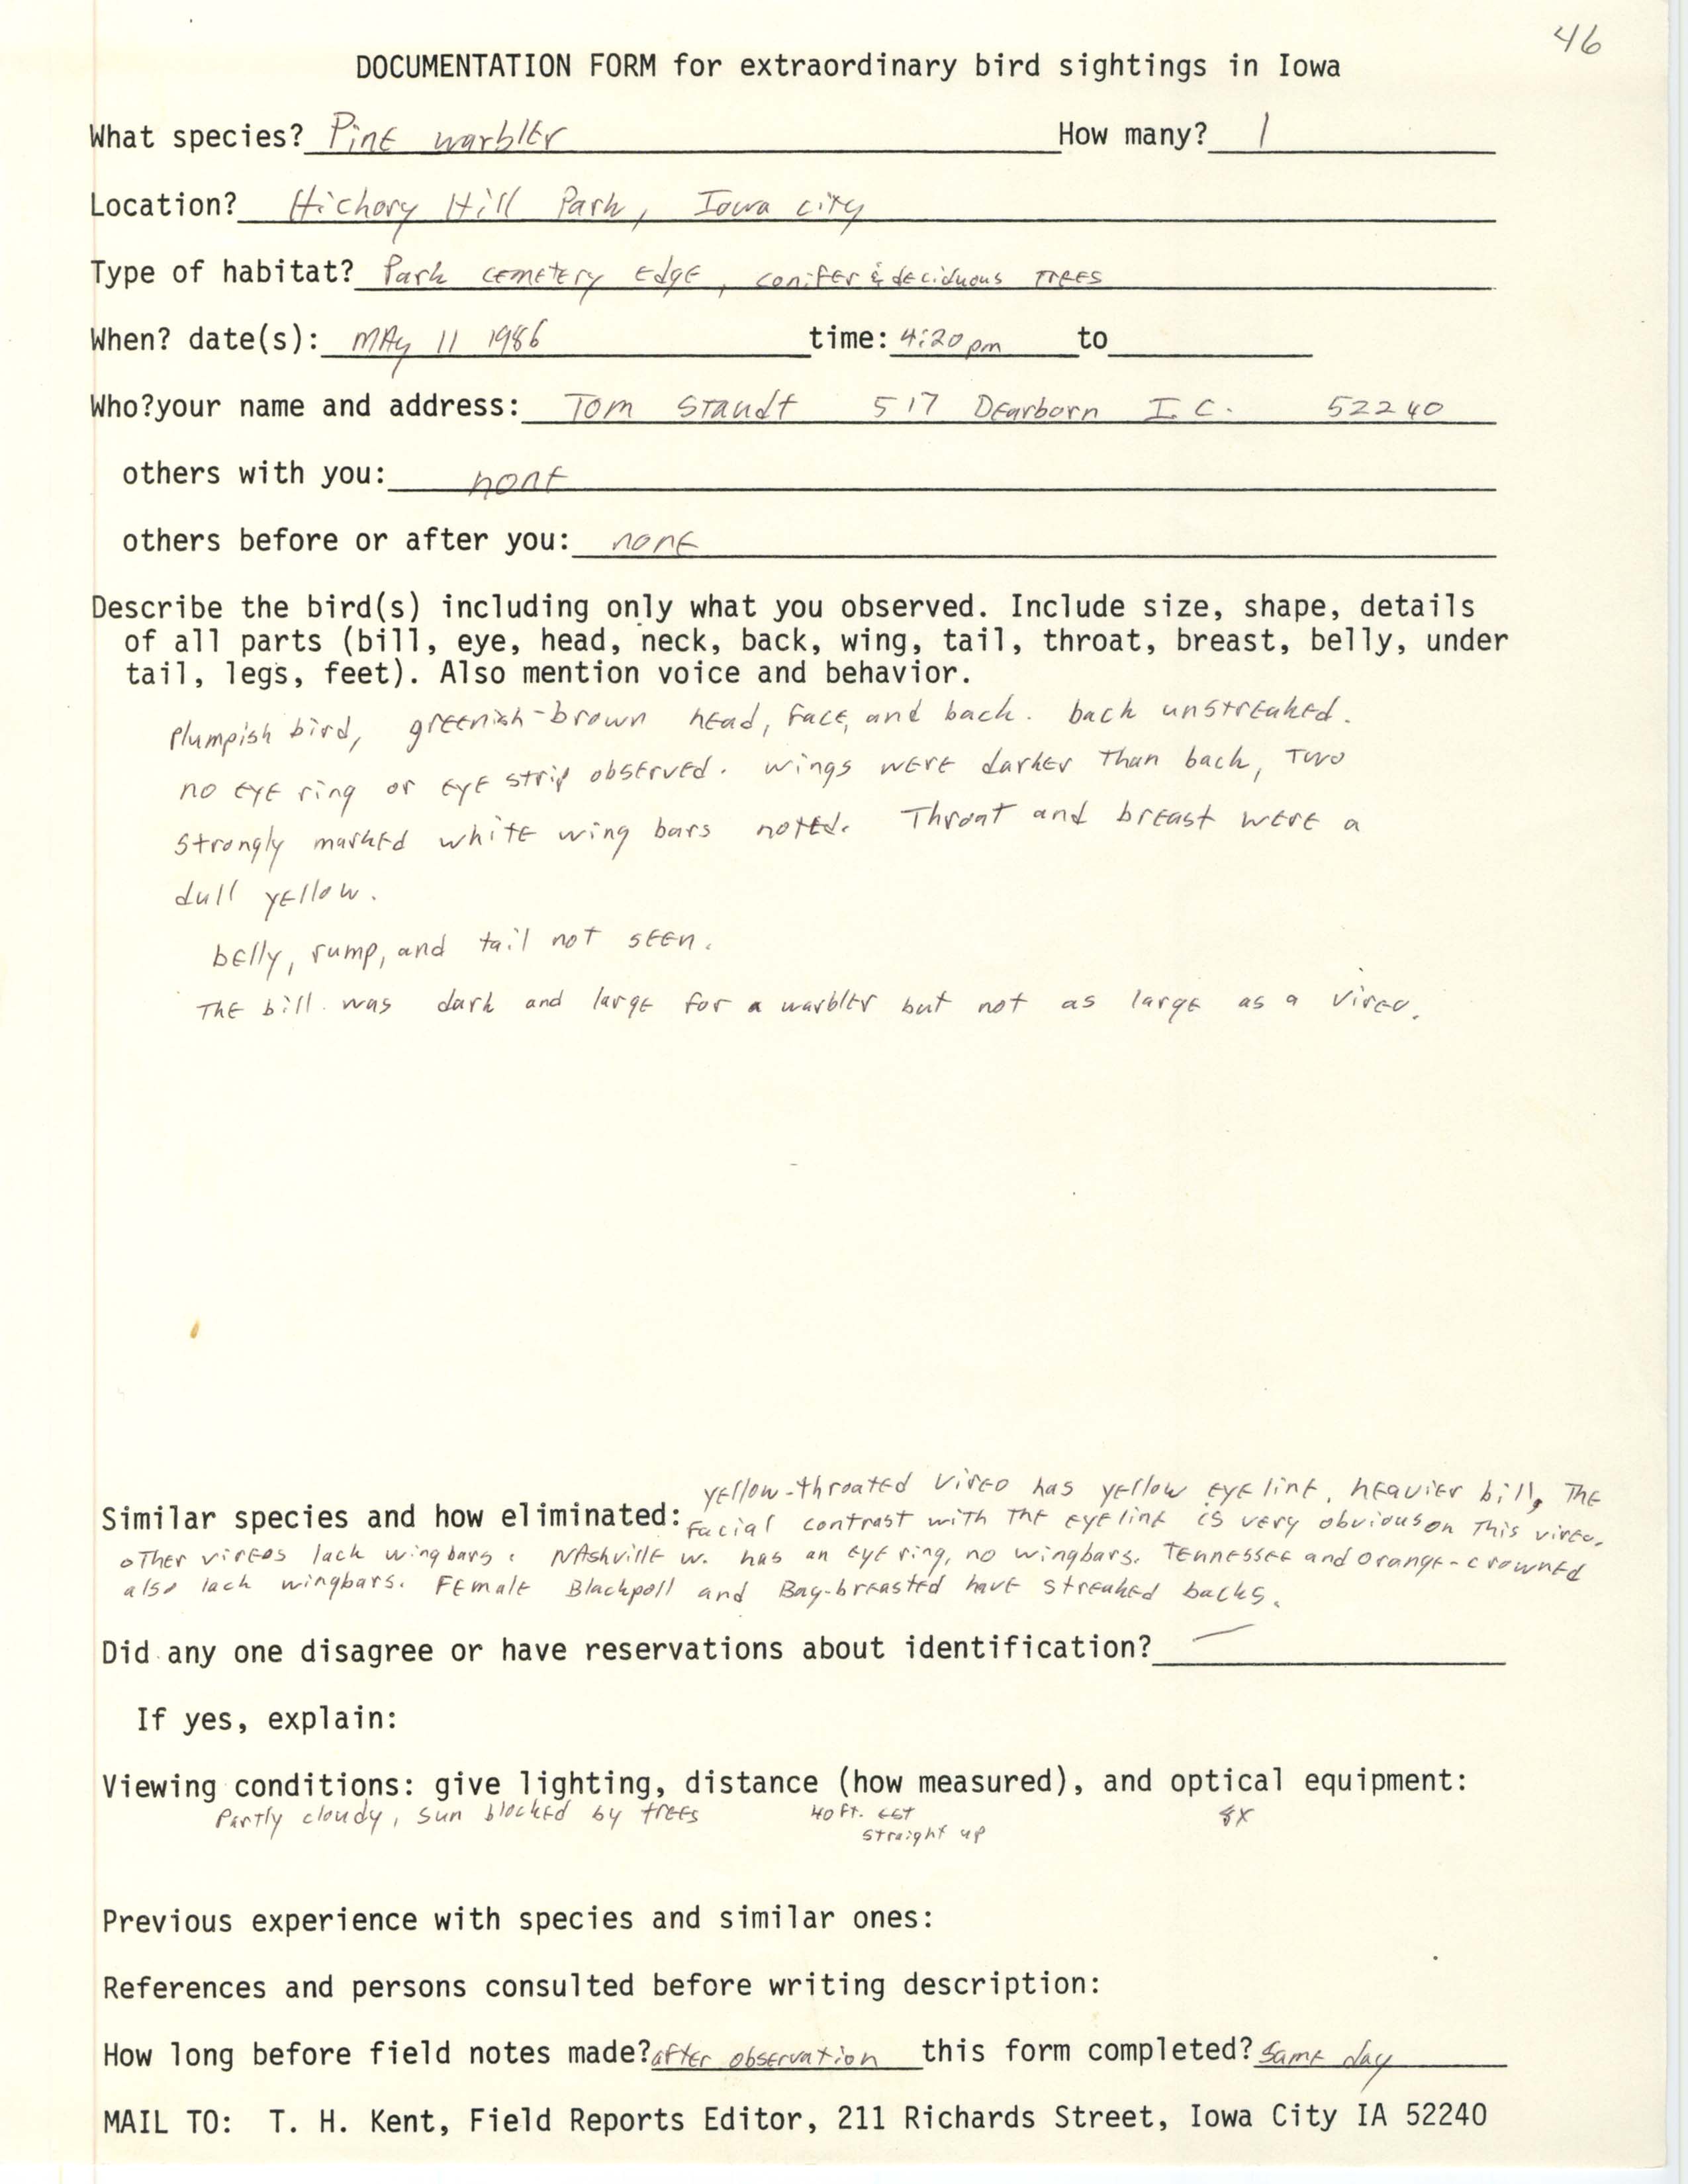 Rare bird documentation form for Pine Warbler at Hickory Hill Park in Iowa City, 1986